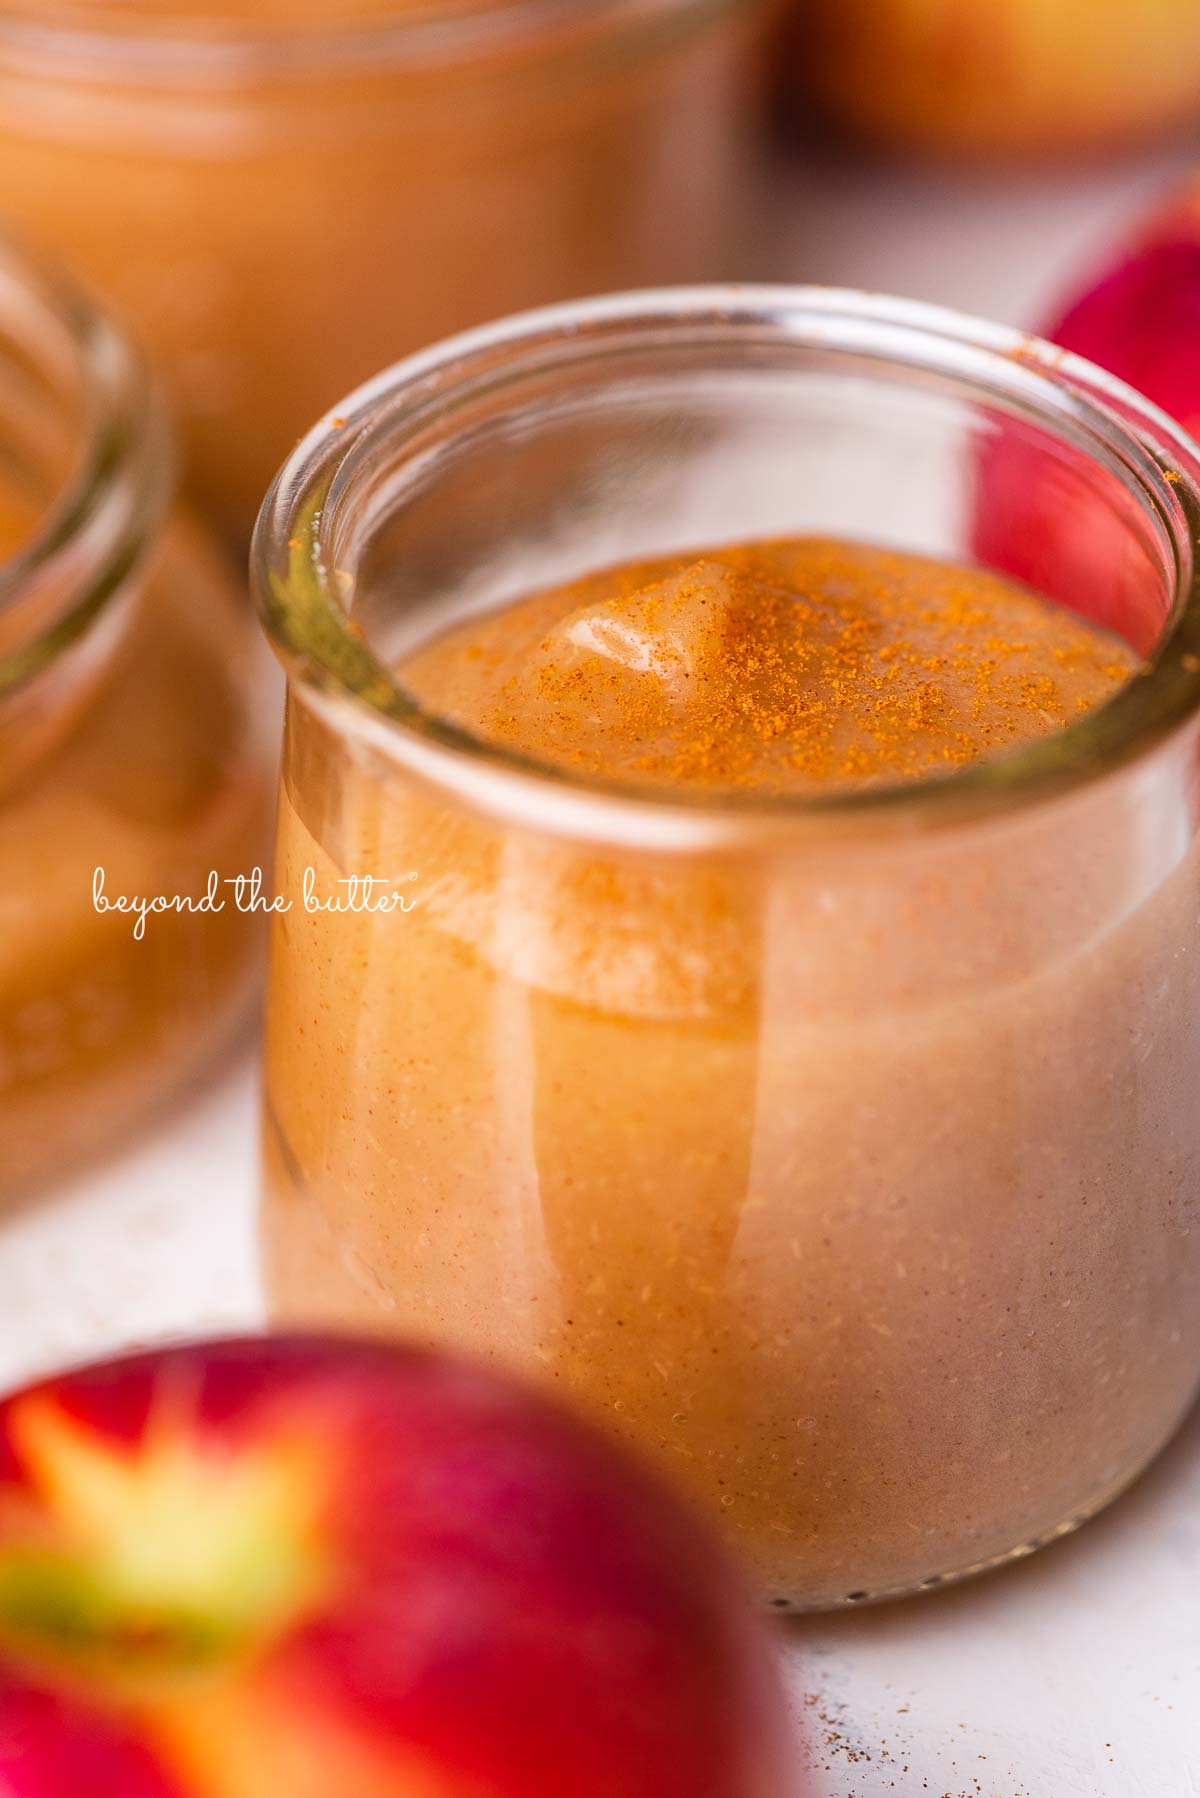 Small jars of no sugar added homemade applesauce with apples next to the jars | © Beyond the Butter®